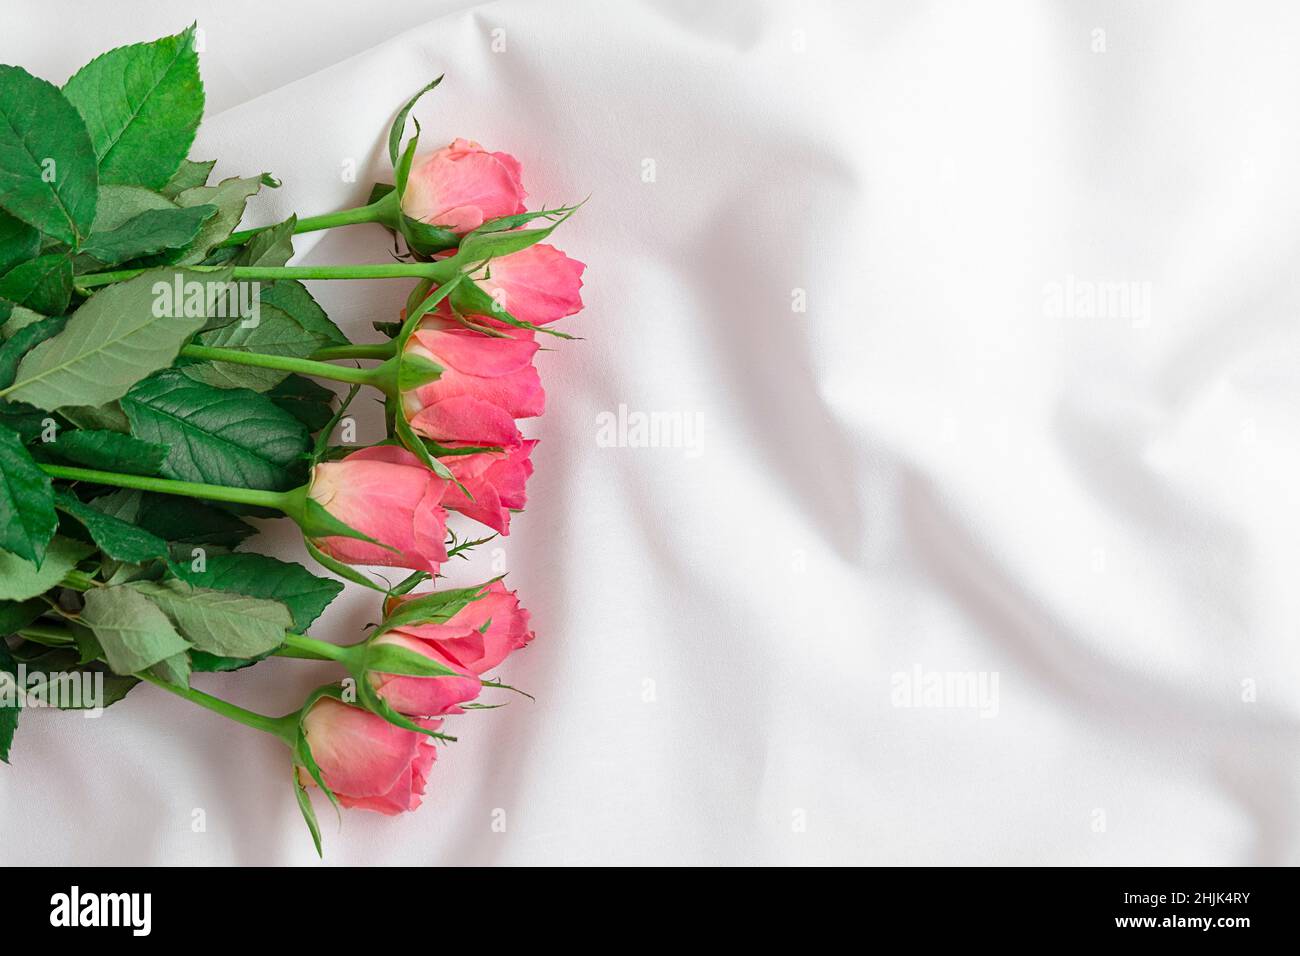 Pink rose with green leaves among the folds of a white textured textile. Roses on bed, romantic concept Stock Photo